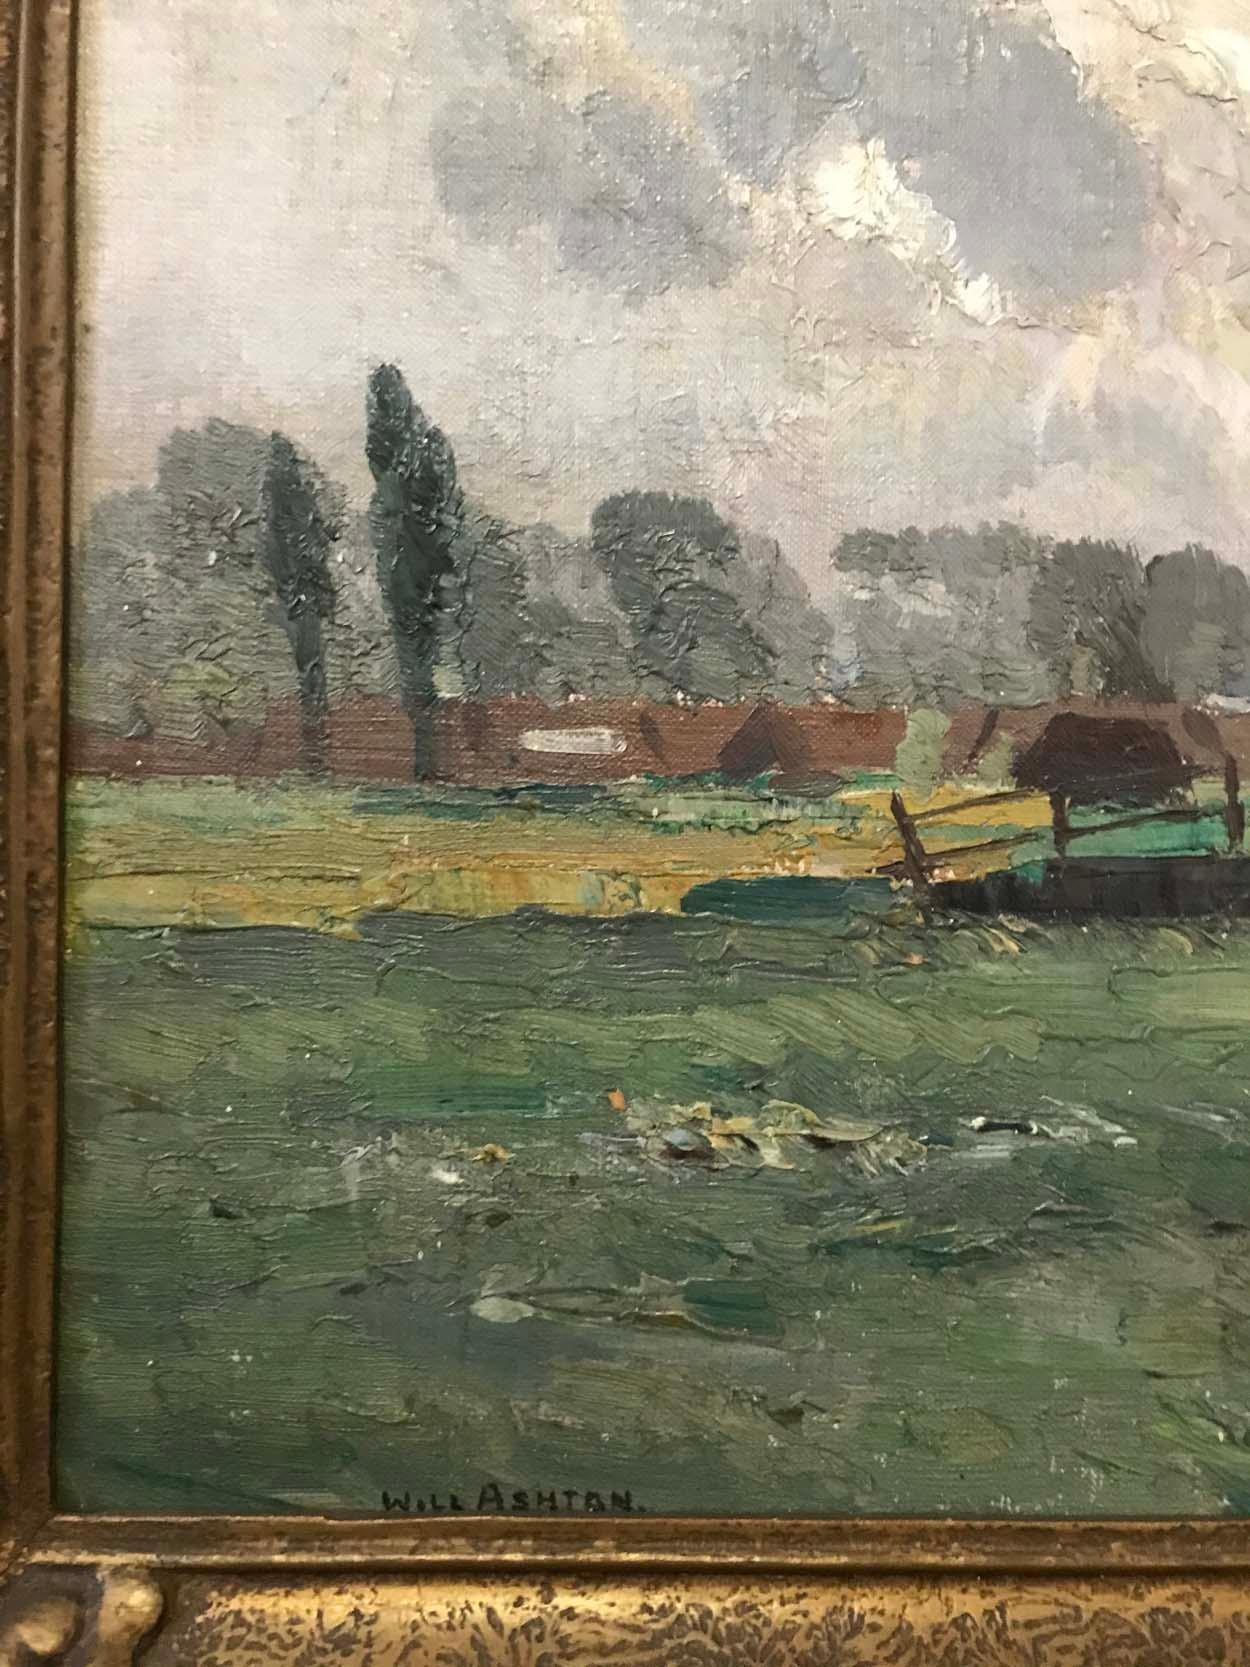 William Ashton (1881-1963), Oil on canvas on board, signed lower left: Will Ashton.

This work was probably painted on one of Ashtons painting trips to the UK in the early years of the 20th century. The image of a Norfolk windmill is painted in a